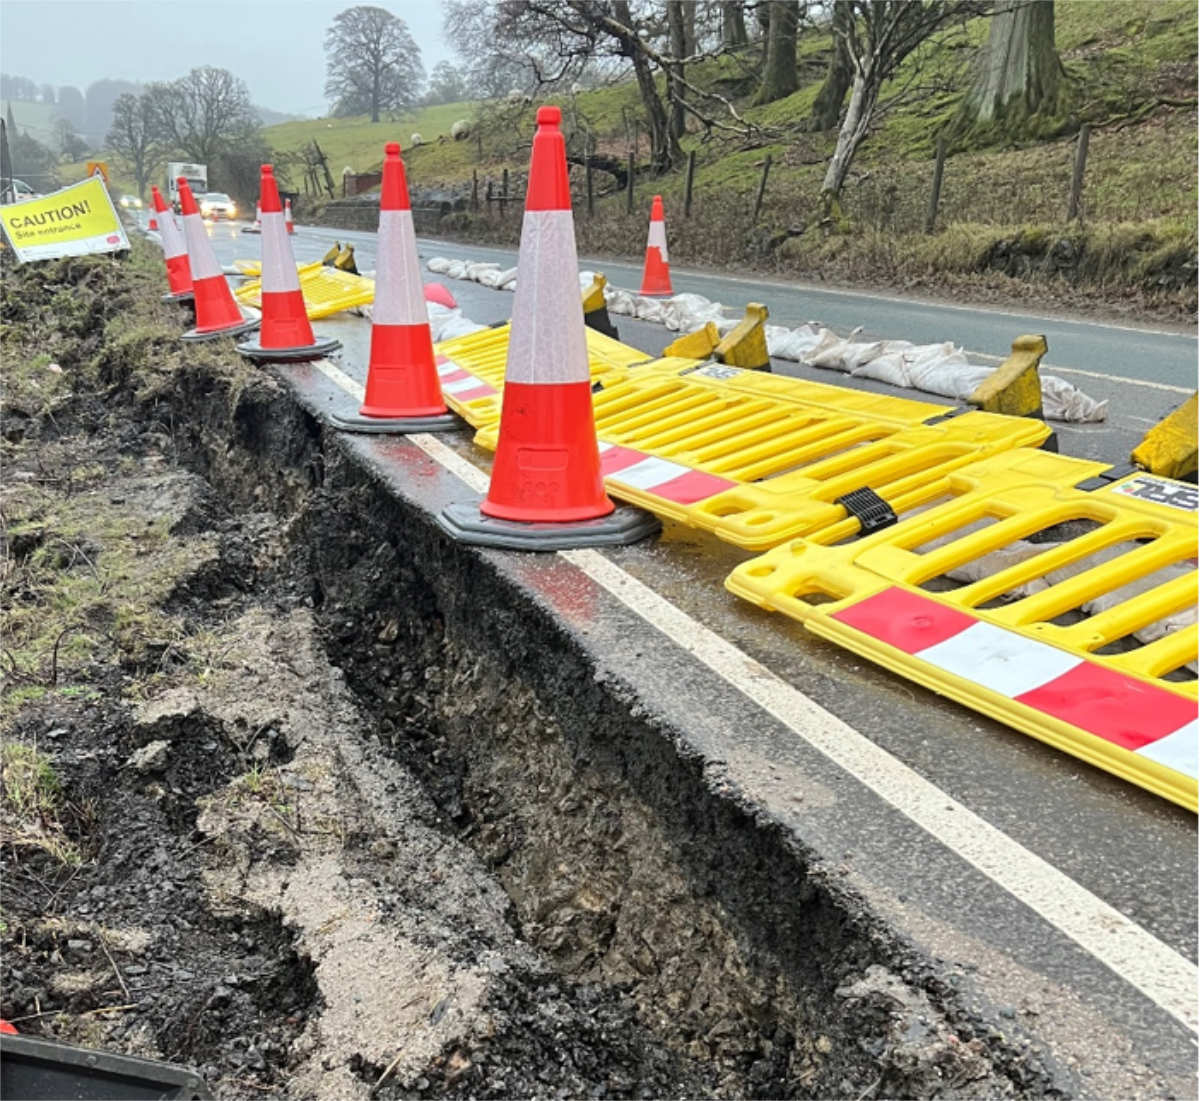 The A59 at Kex Gill, near Harrogate, has had to be closed due to a landslip. The key route is set to re-open before the end of June after an extensive repair scheme to stabilise the landslip has been completed